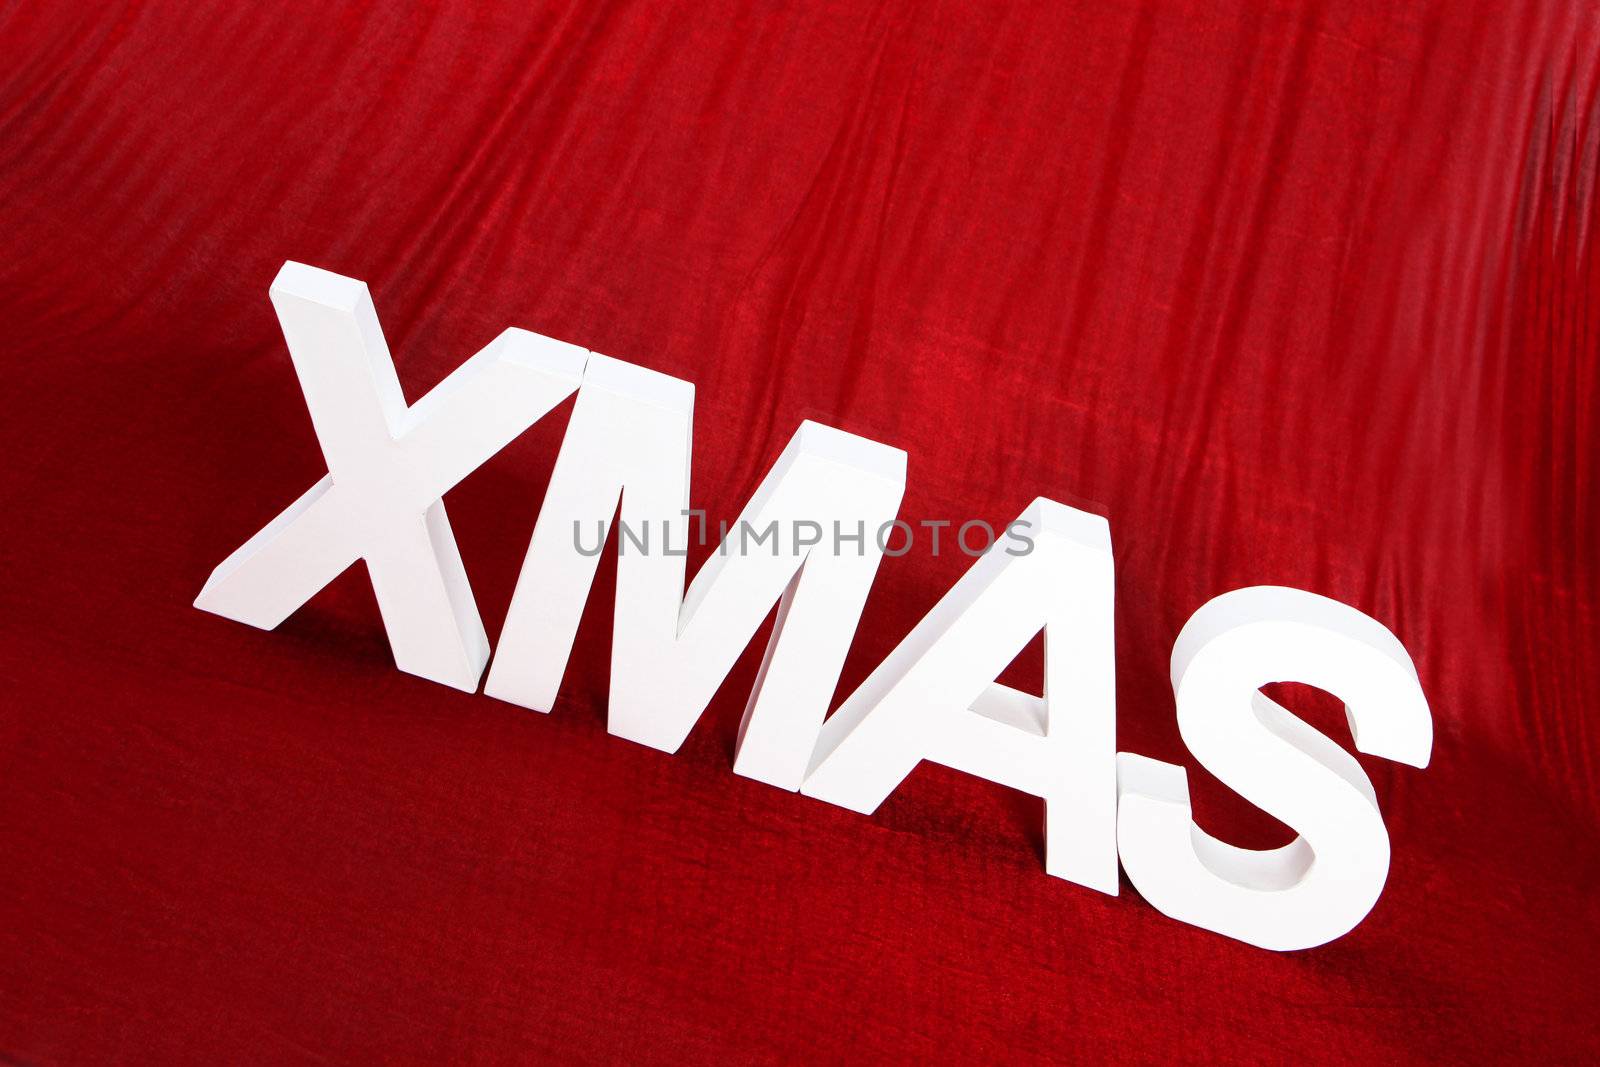 White Xmas letters on a wooden surface